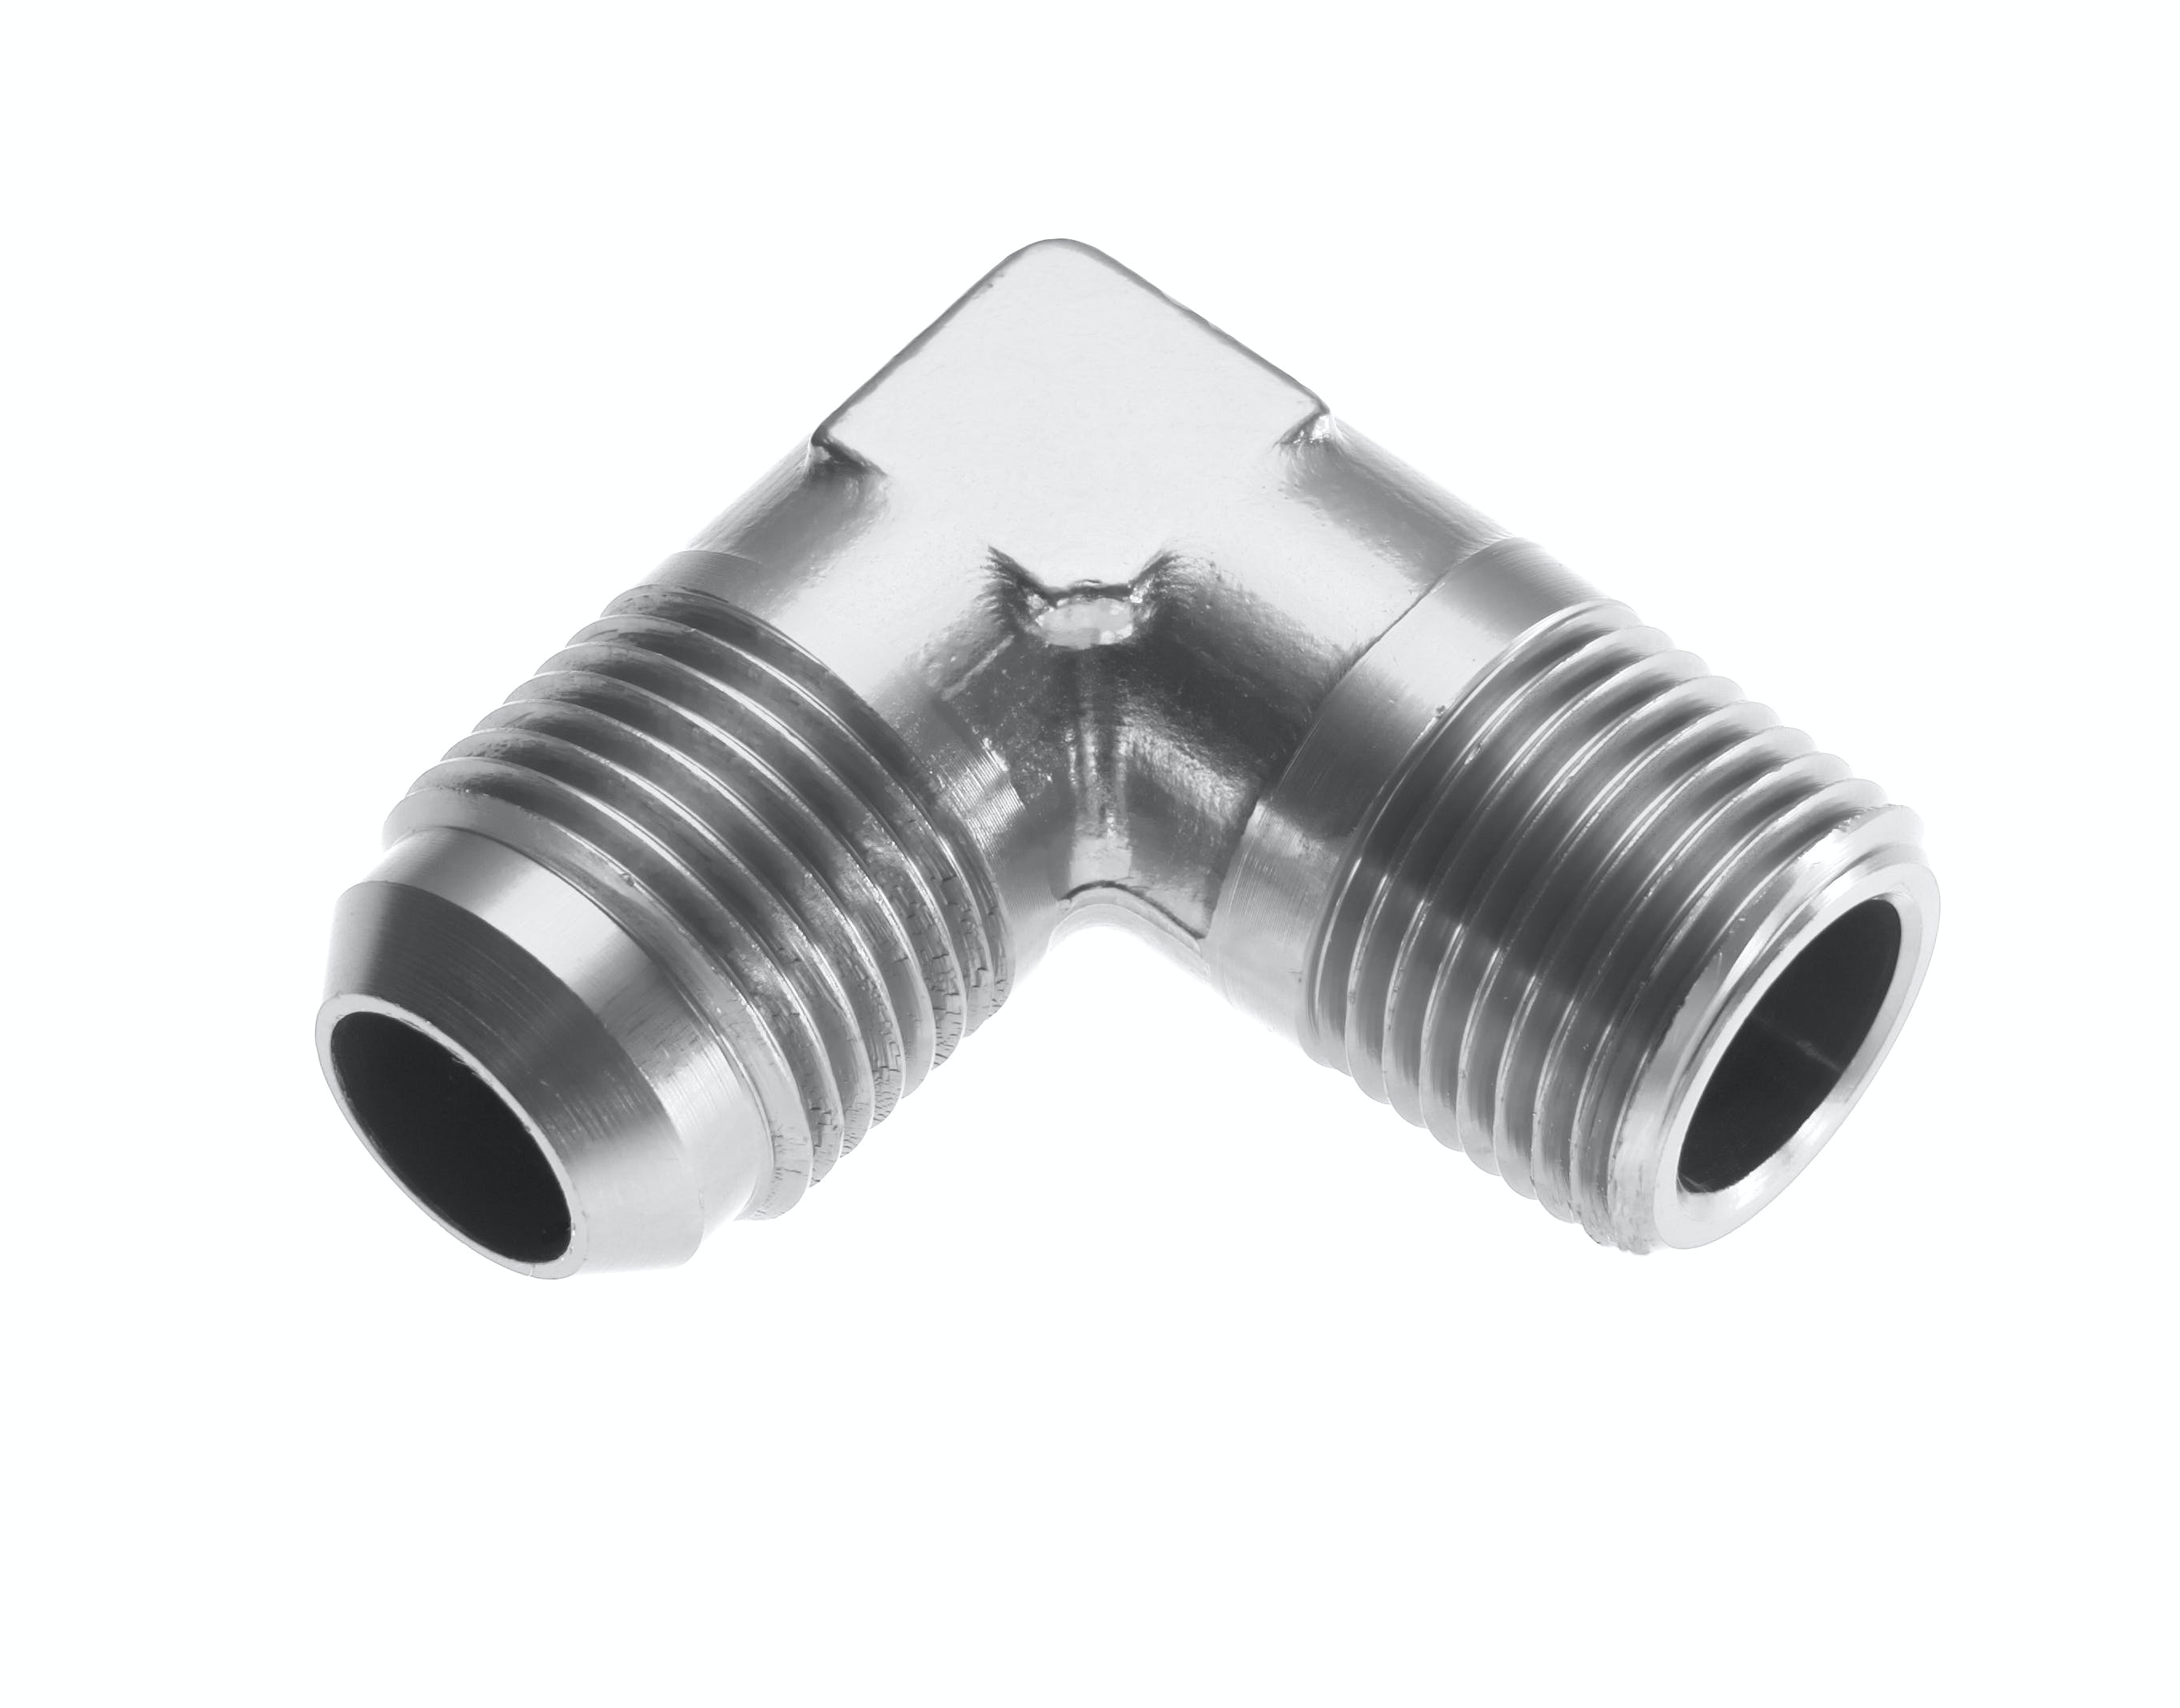 Redhorse Performance 822-12-12-5 -12 90 degree Male adapter to -12 (3/4in) NPT Male - clear